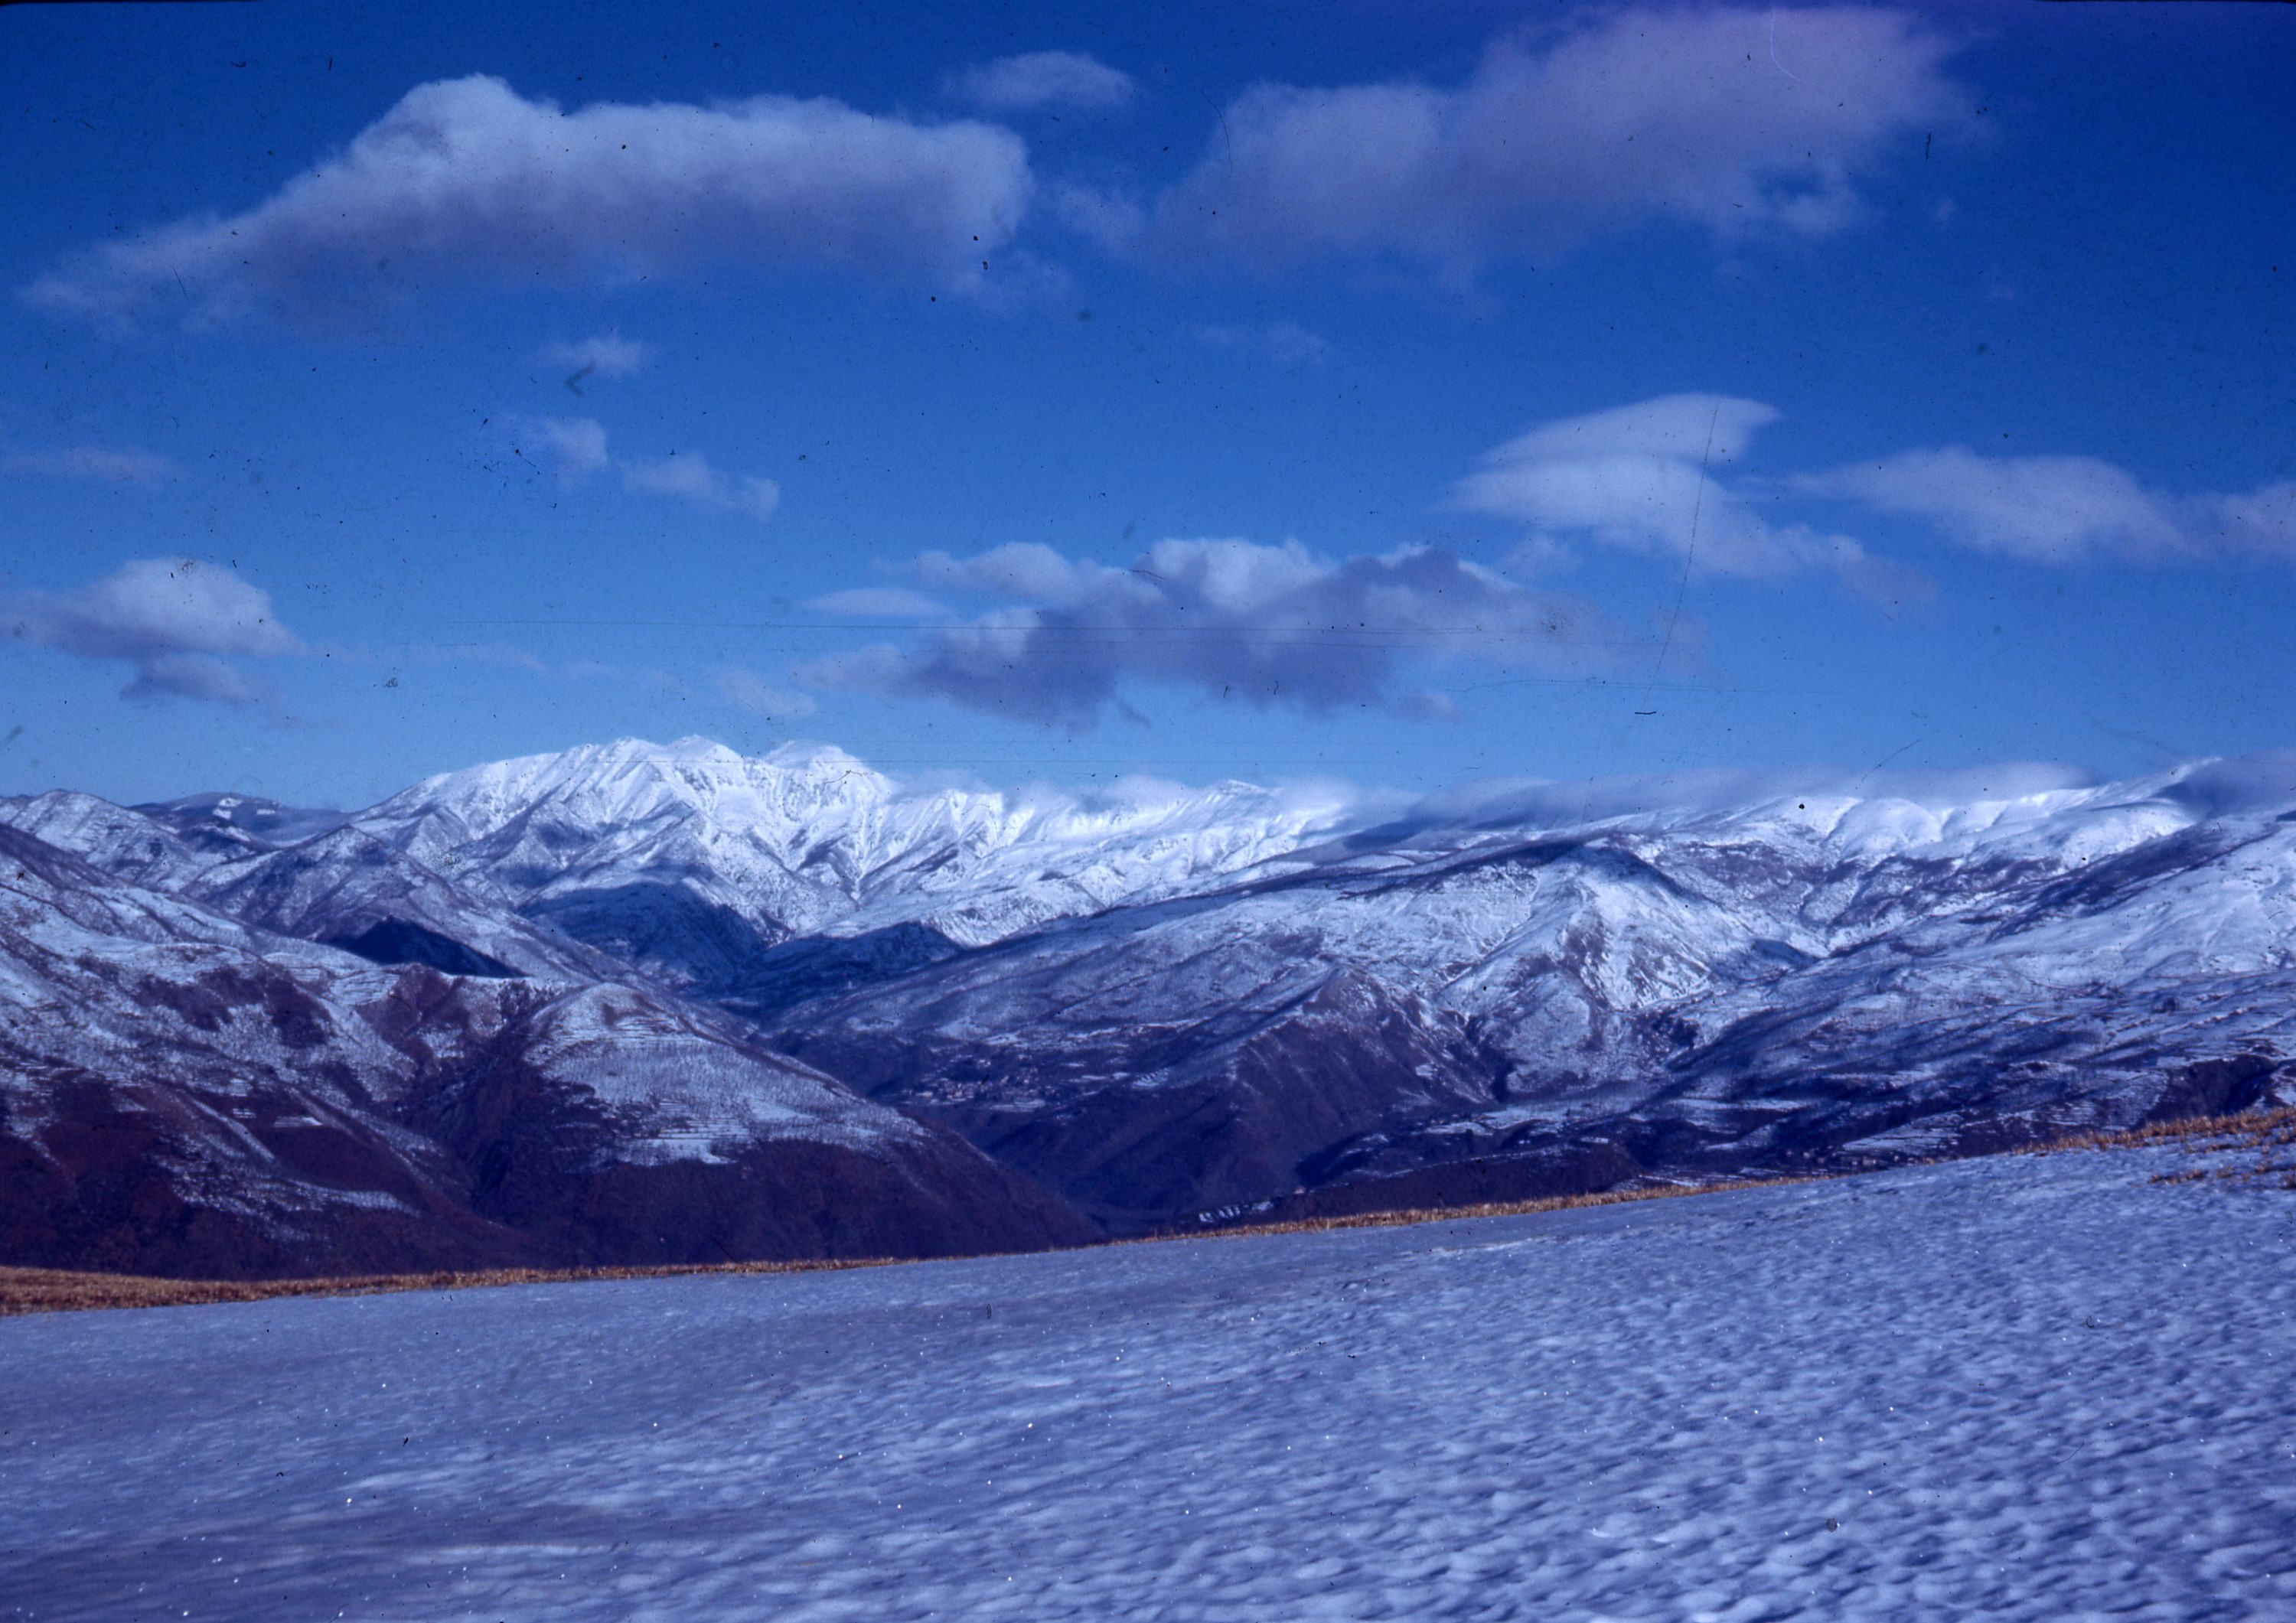 The Apennine Mountains, as photographed by a 10th Mountain Division